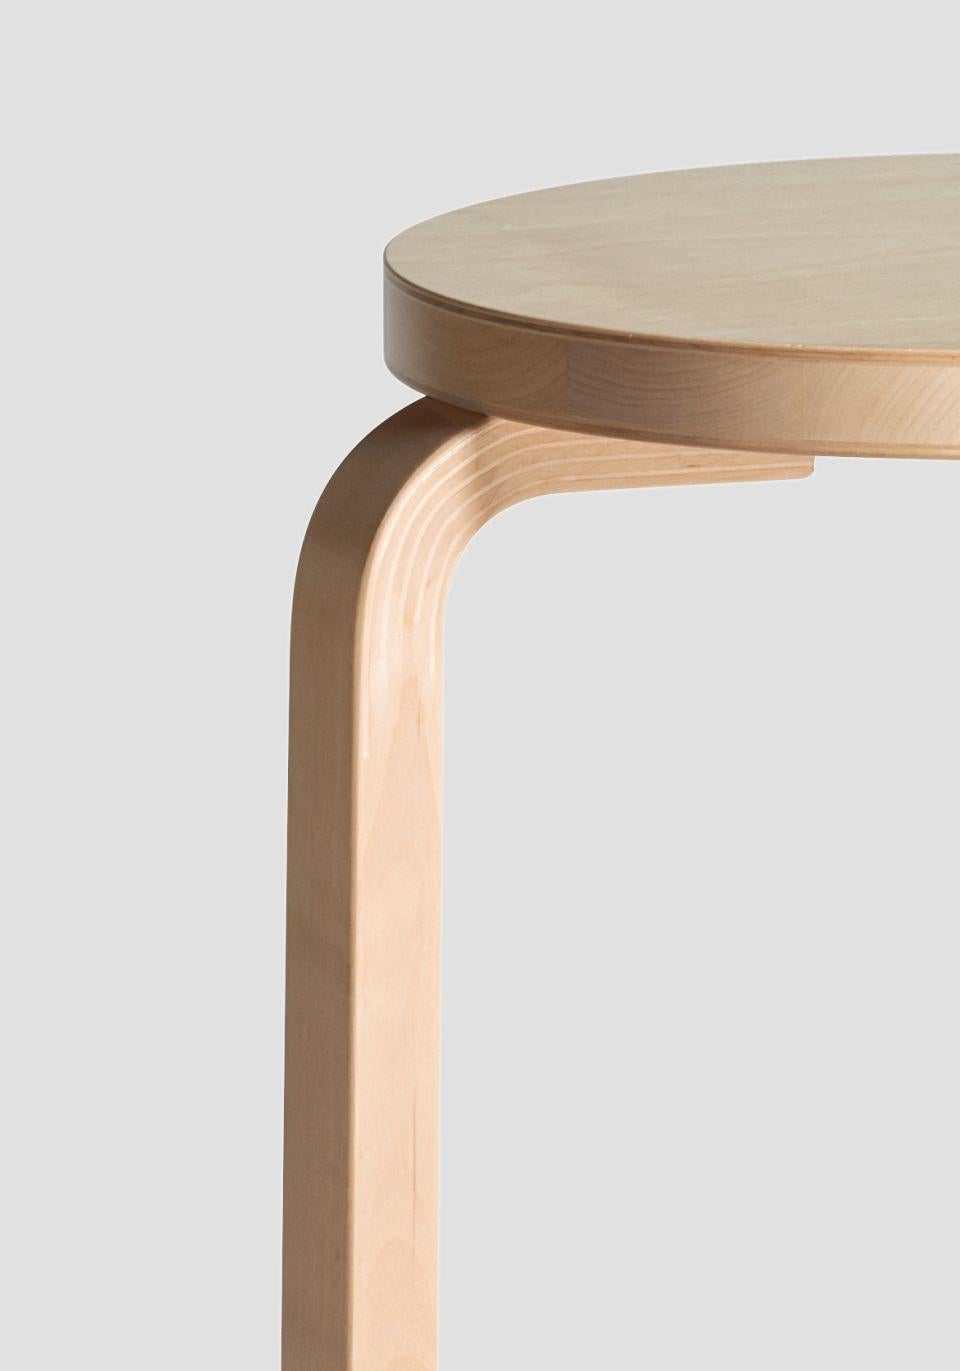 Authentic stool E60 in birch with black lacquer by Alvar Aalto & Artek. Projecting a sense of relaxed familiarity, stool E60 is equally suited to the home, public buildings, and educational facilities. The legs are mounted directly to the underside